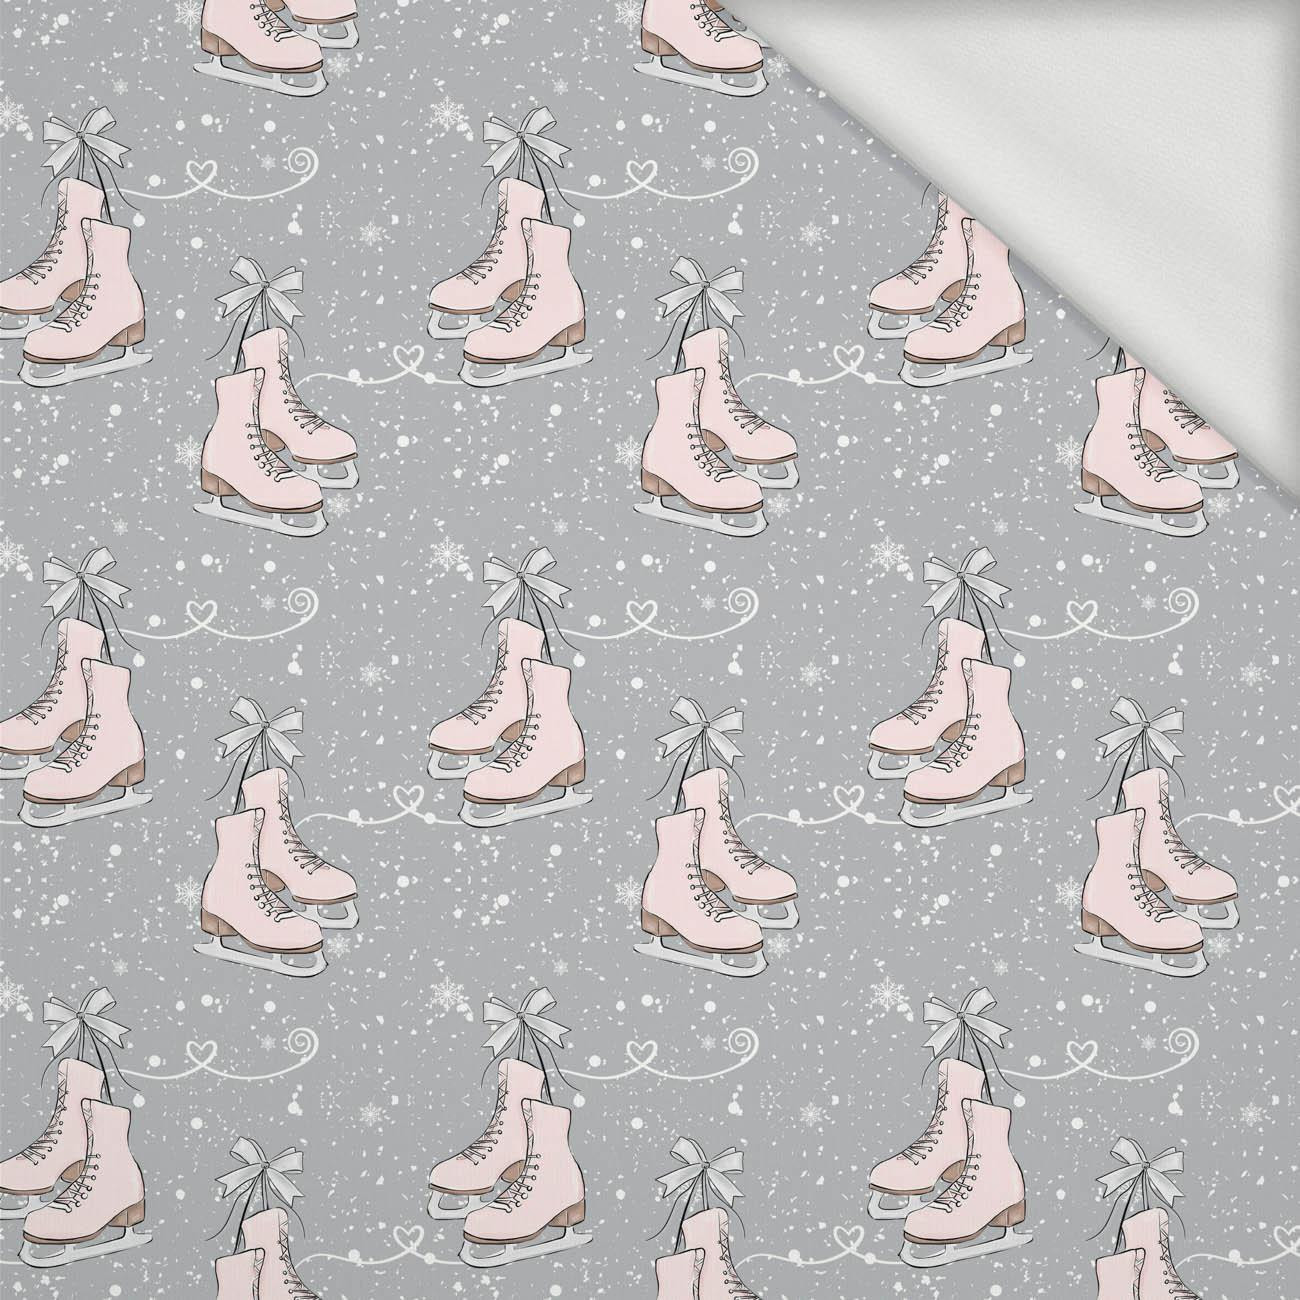 PINK ICE SKATES  (WINTER)  - looped knit fabric